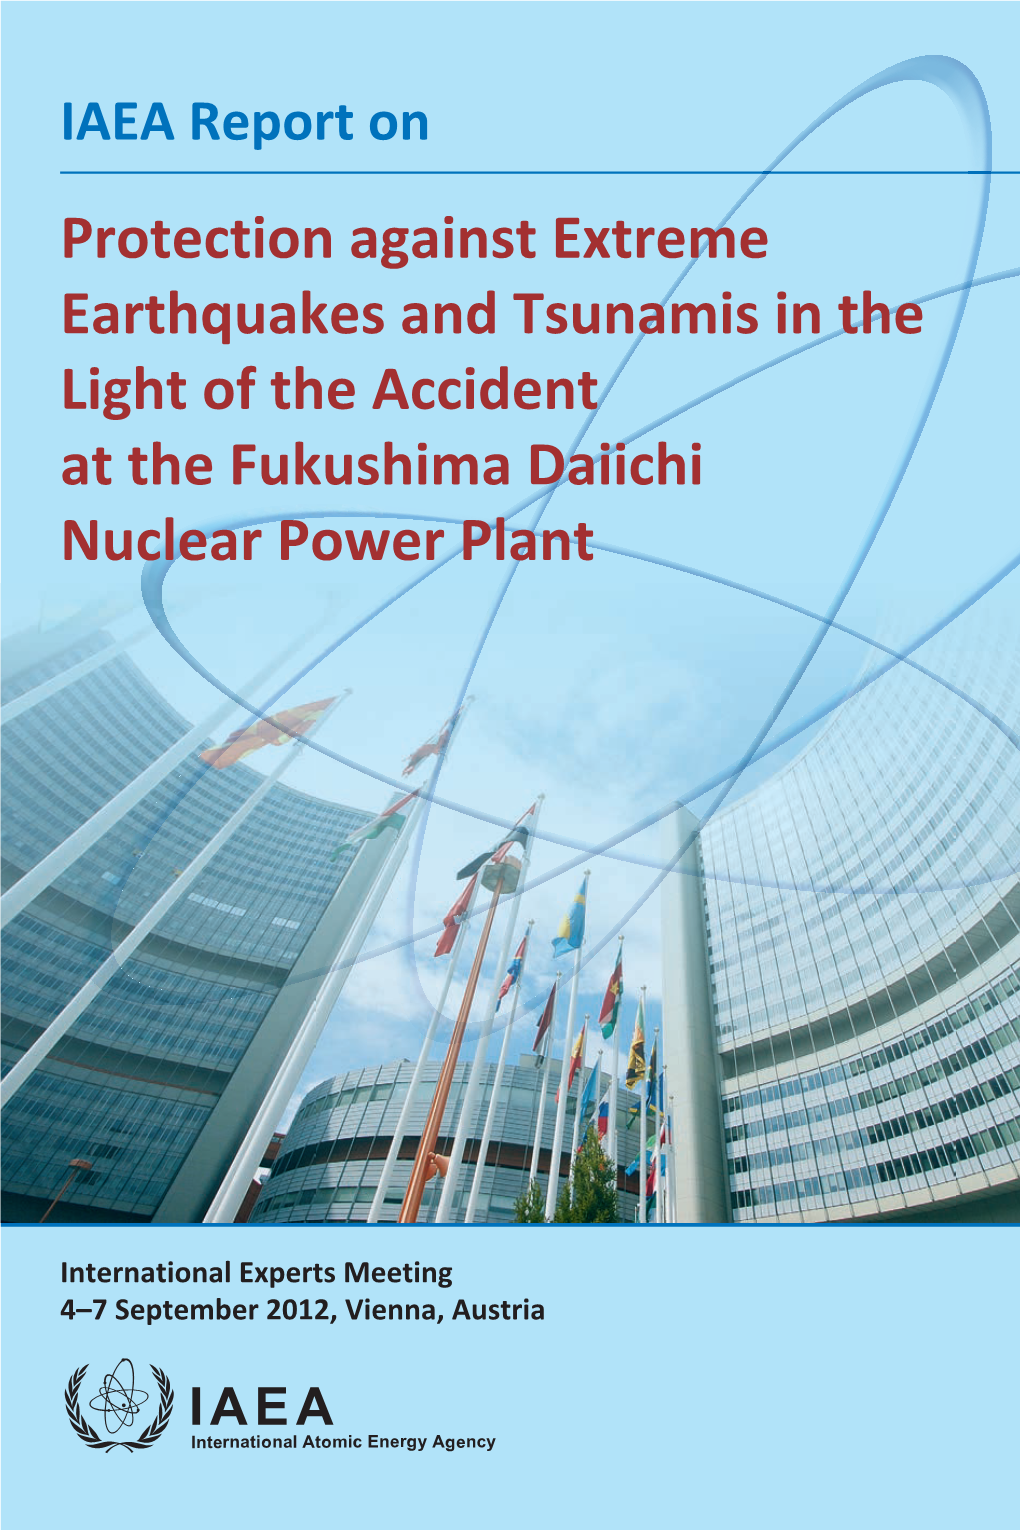 Protection Against Extreme Earthquakes and Tsunamis in Light